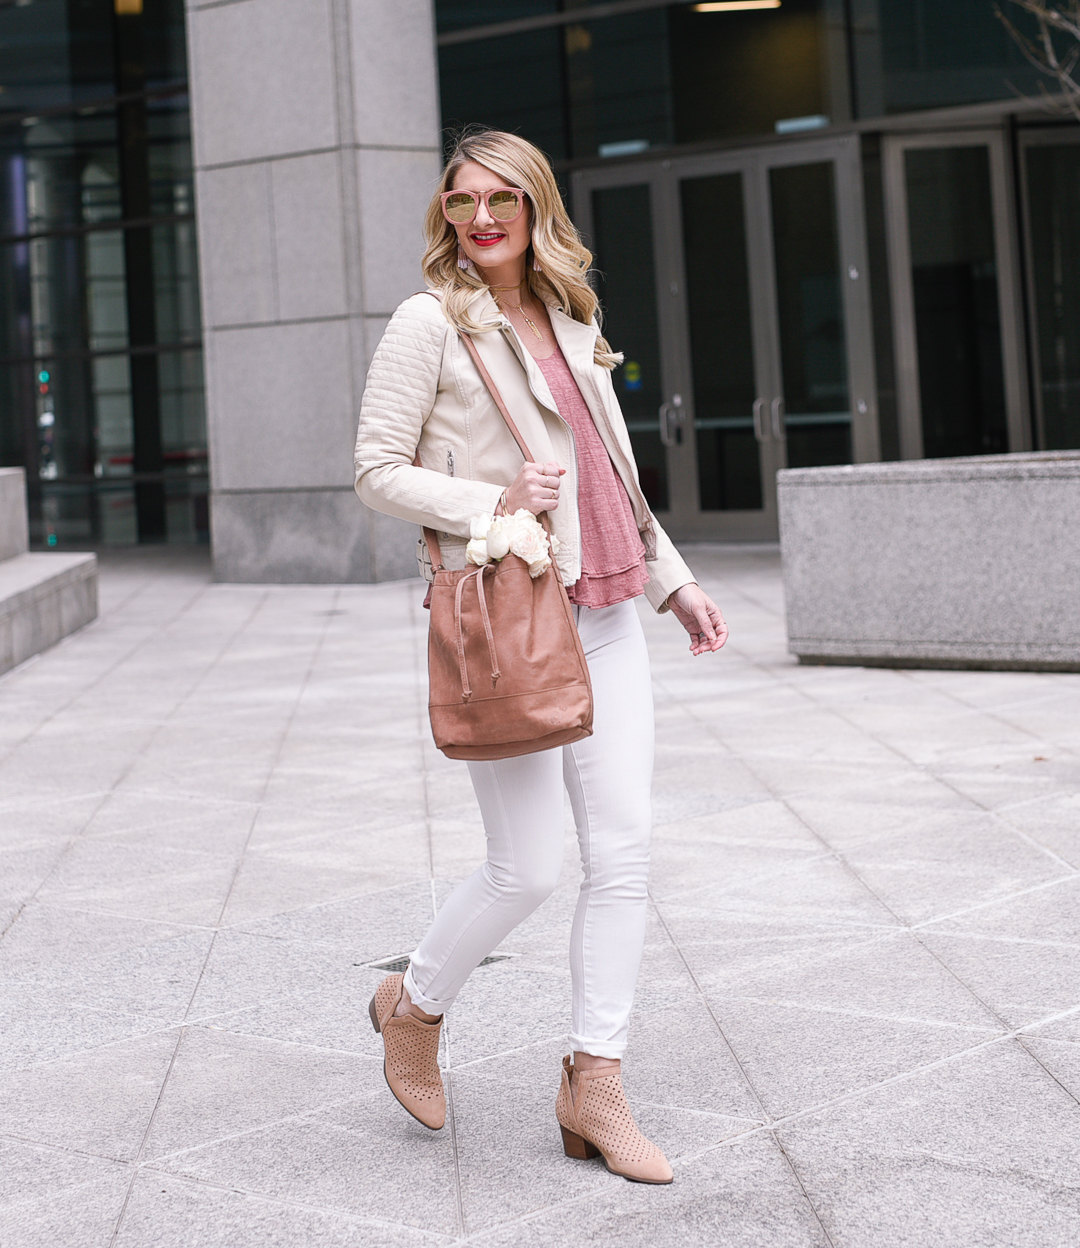 Spring weekend outfit with a pink leather bag and a layered tank top. 